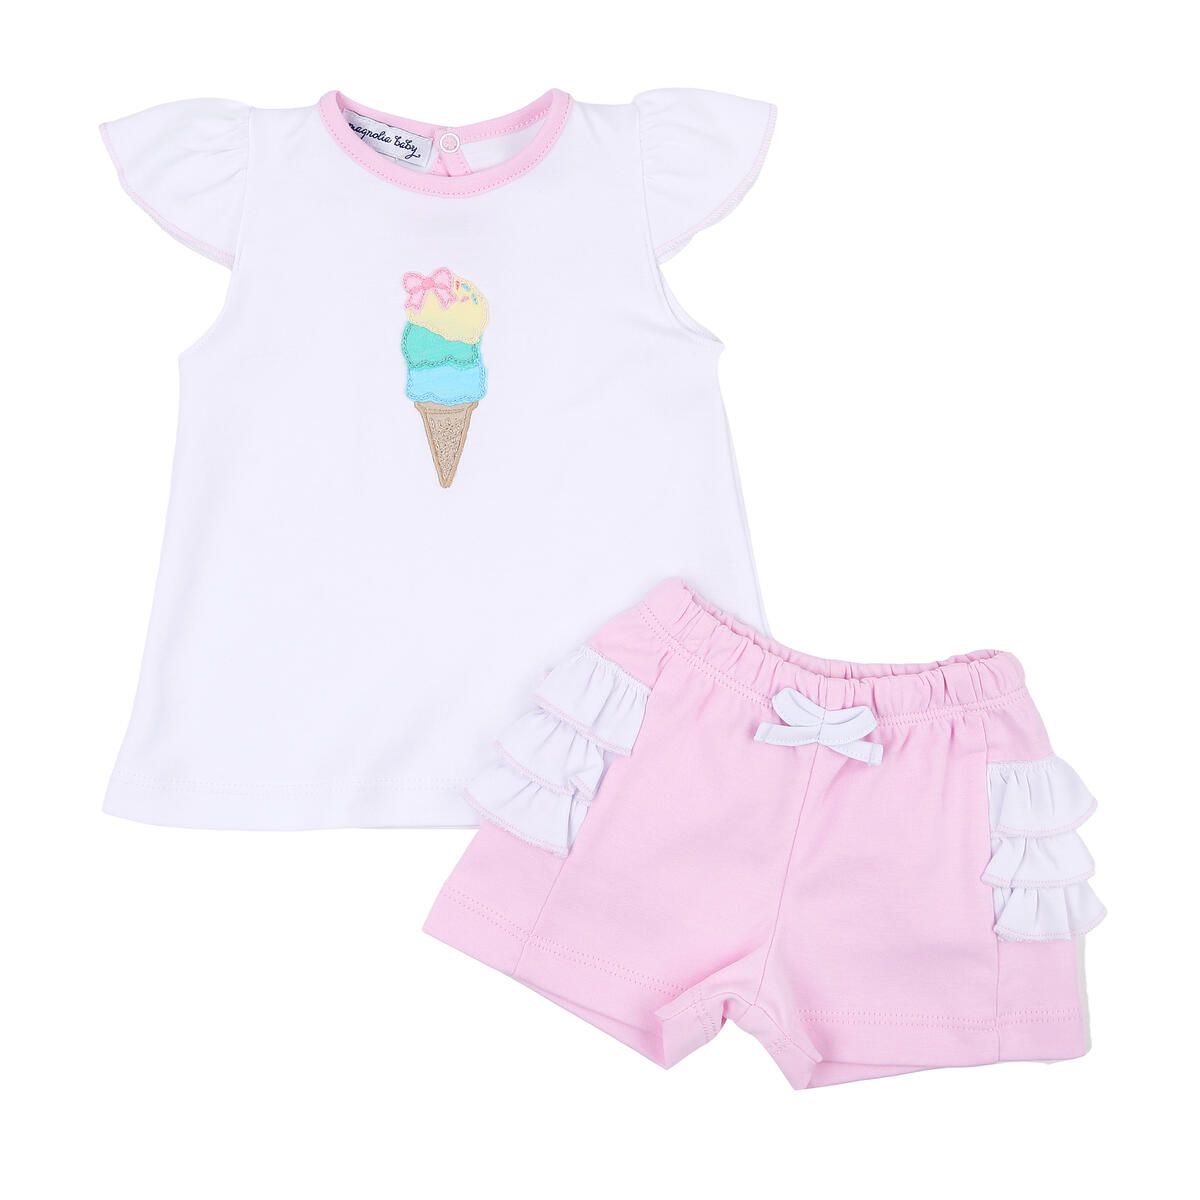 What's the Scoop! Ruffle Toddler Short Set